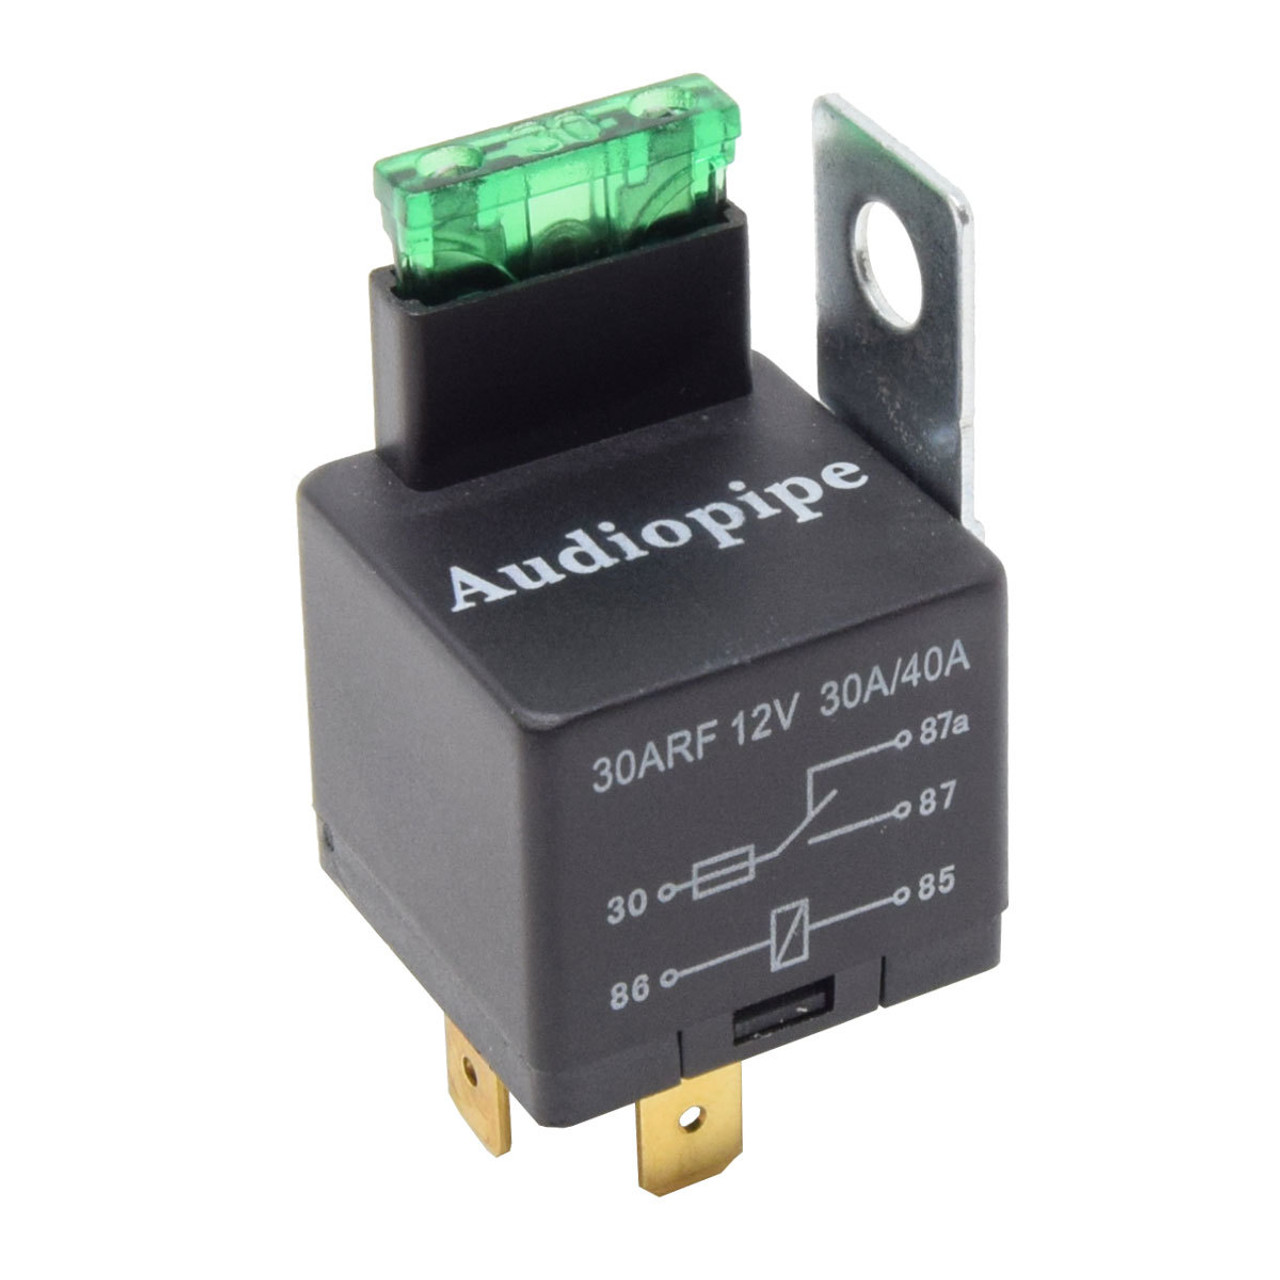 https://cdn11.bigcommerce.com/s-lqmdu1tdke/images/stencil/1280x1280/products/3064/45086/30arf-x-2-2-pack-fused-relay-12v-30a-40a-5-pin-auto-metal-mounting-tab-spst-built-in-fuse-2__53568.1557326322.jpg?c=2